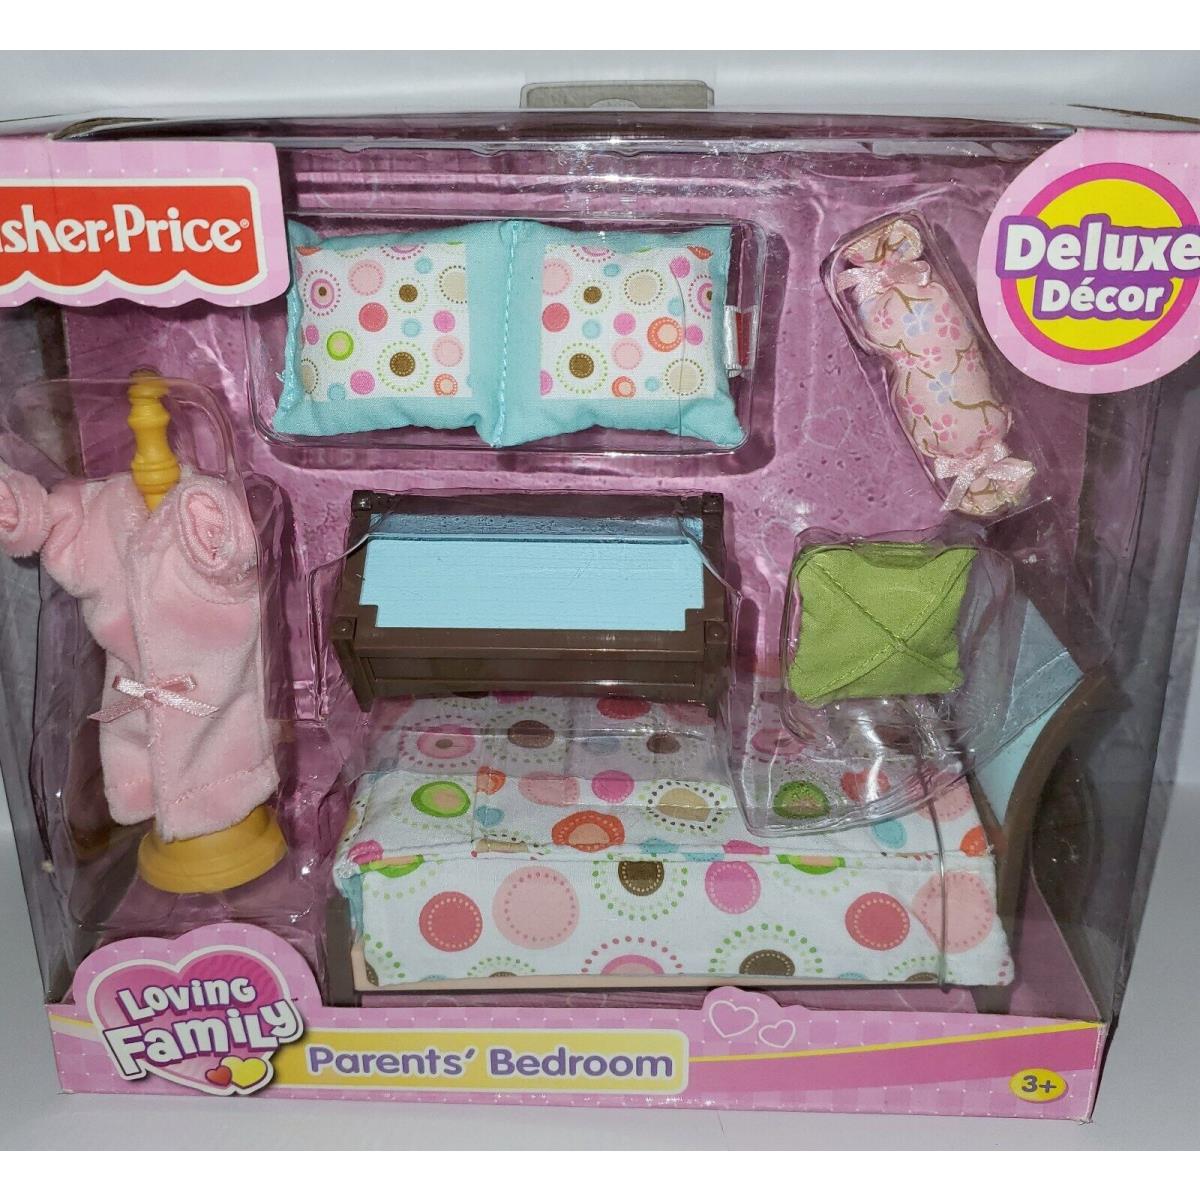 Loving Family Twintime Grand Doll House Play Set Parents Bedroom Furniture